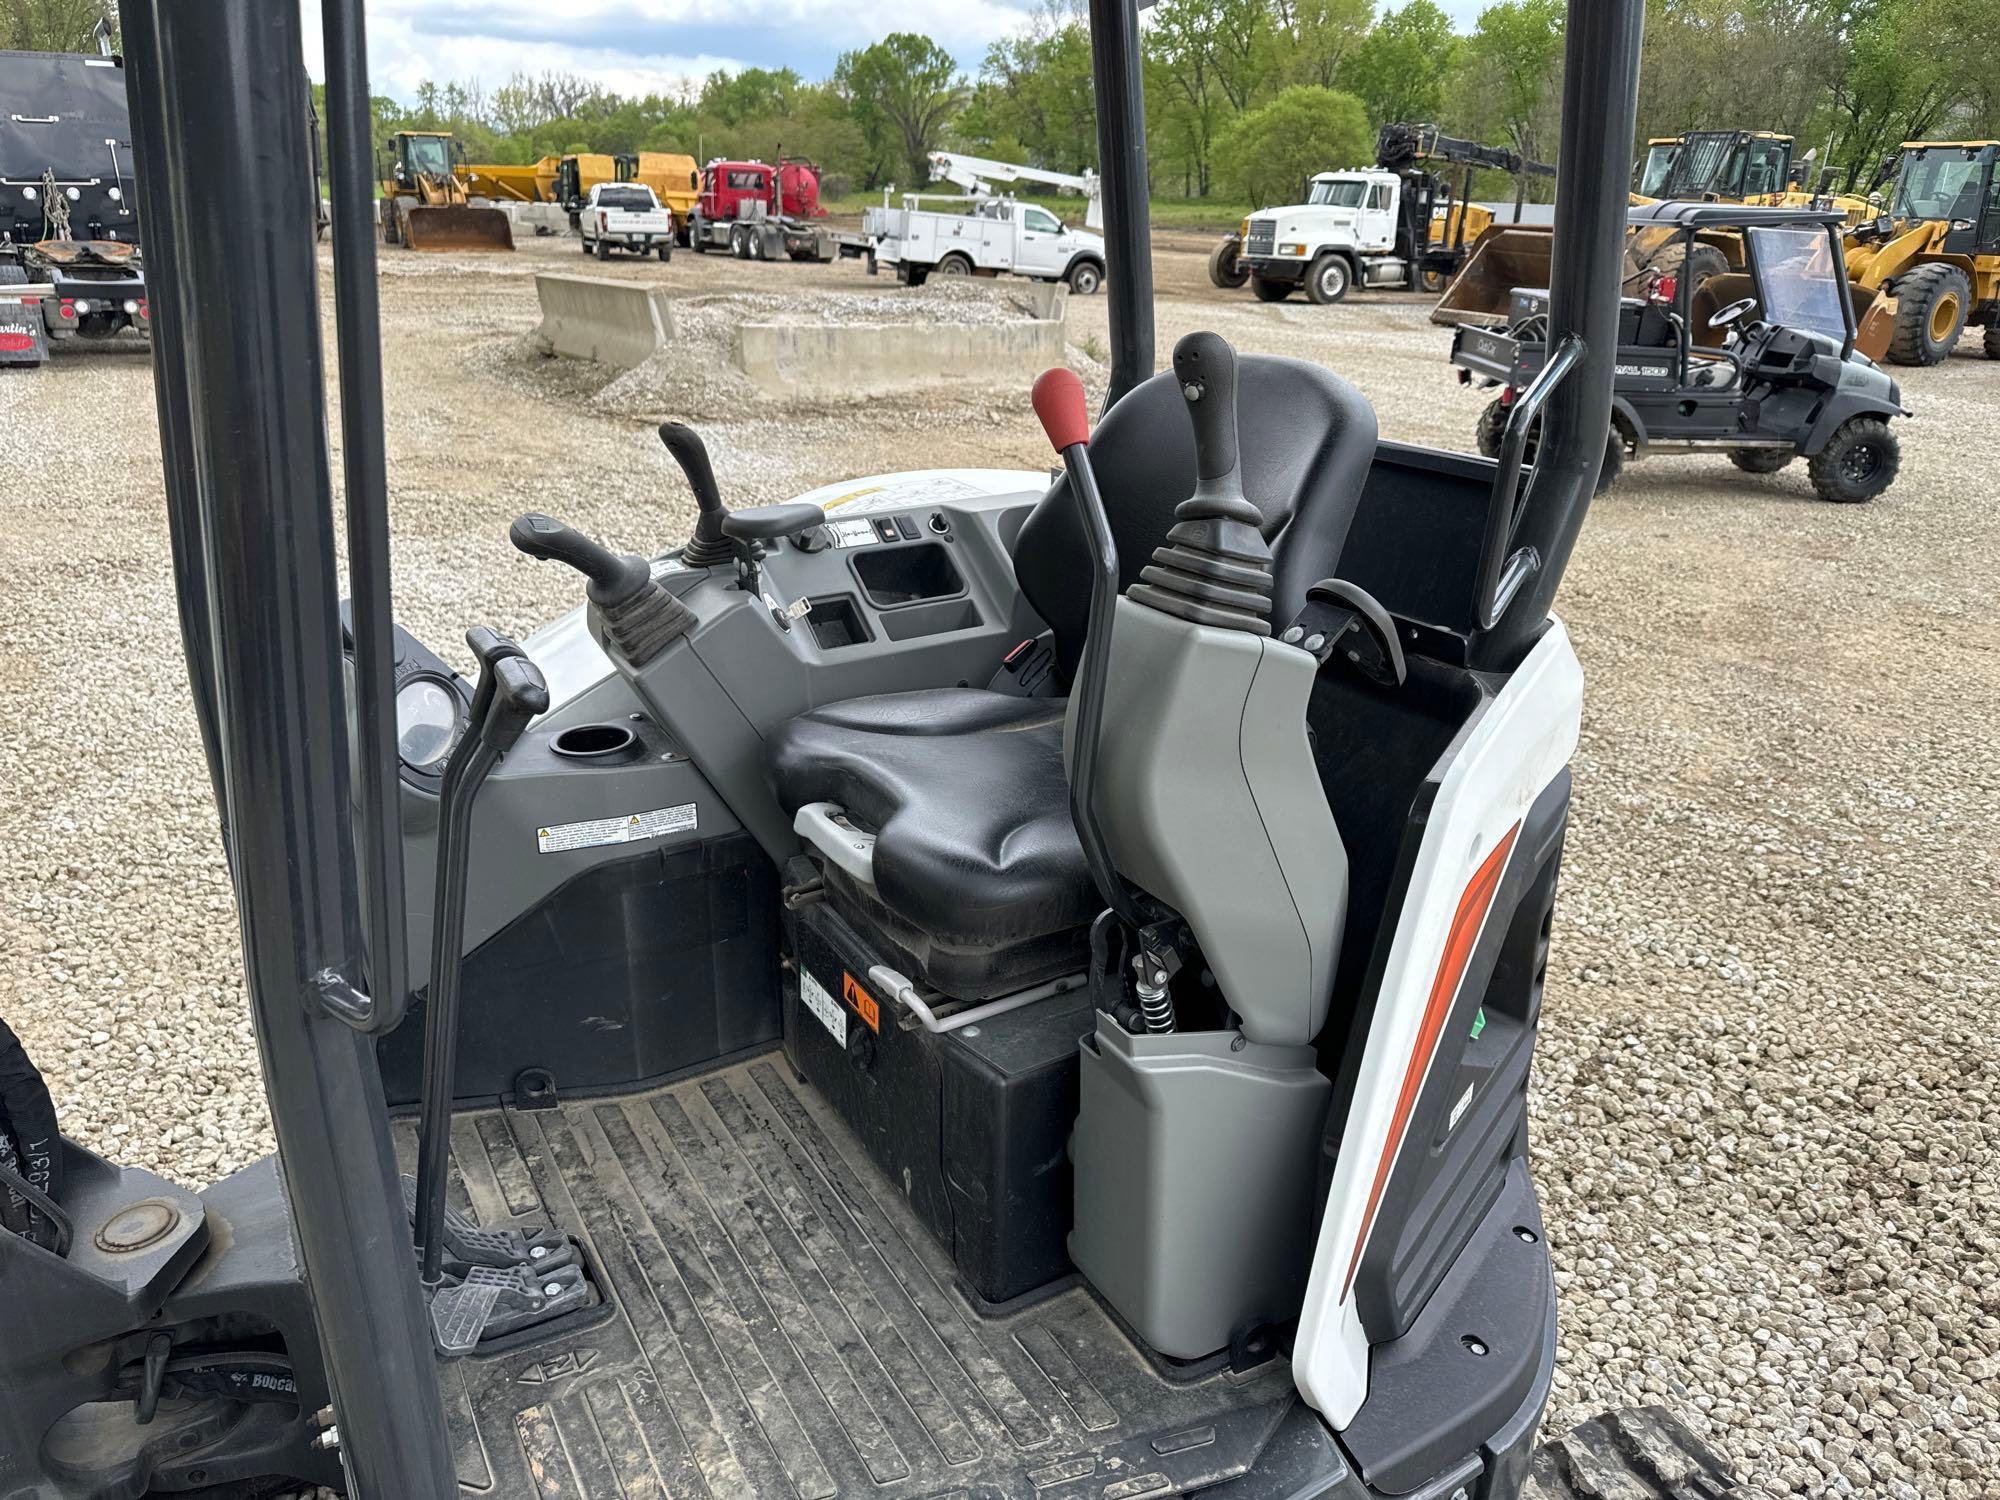 2023 BOBCAT E35R2-SERIES HYDRAULIC EXCAVATOR SN-914134, powered by diesel engine, equipped with